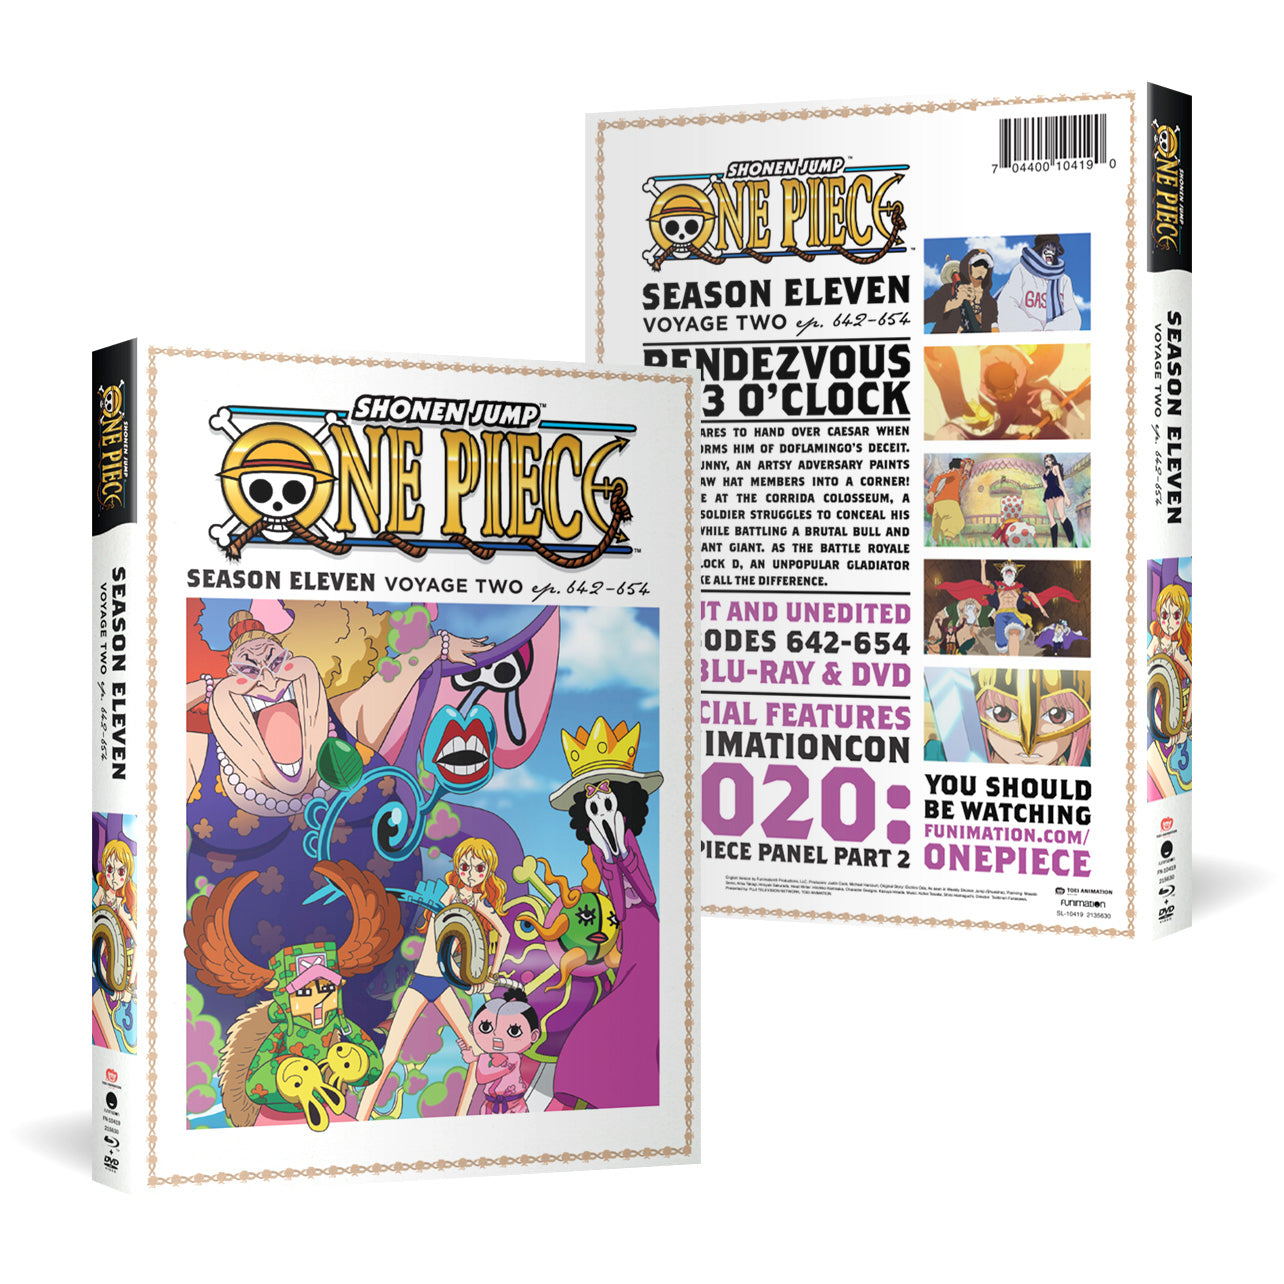 One Piece - Season Eleven Voyage Two - BD/DVD image count 0